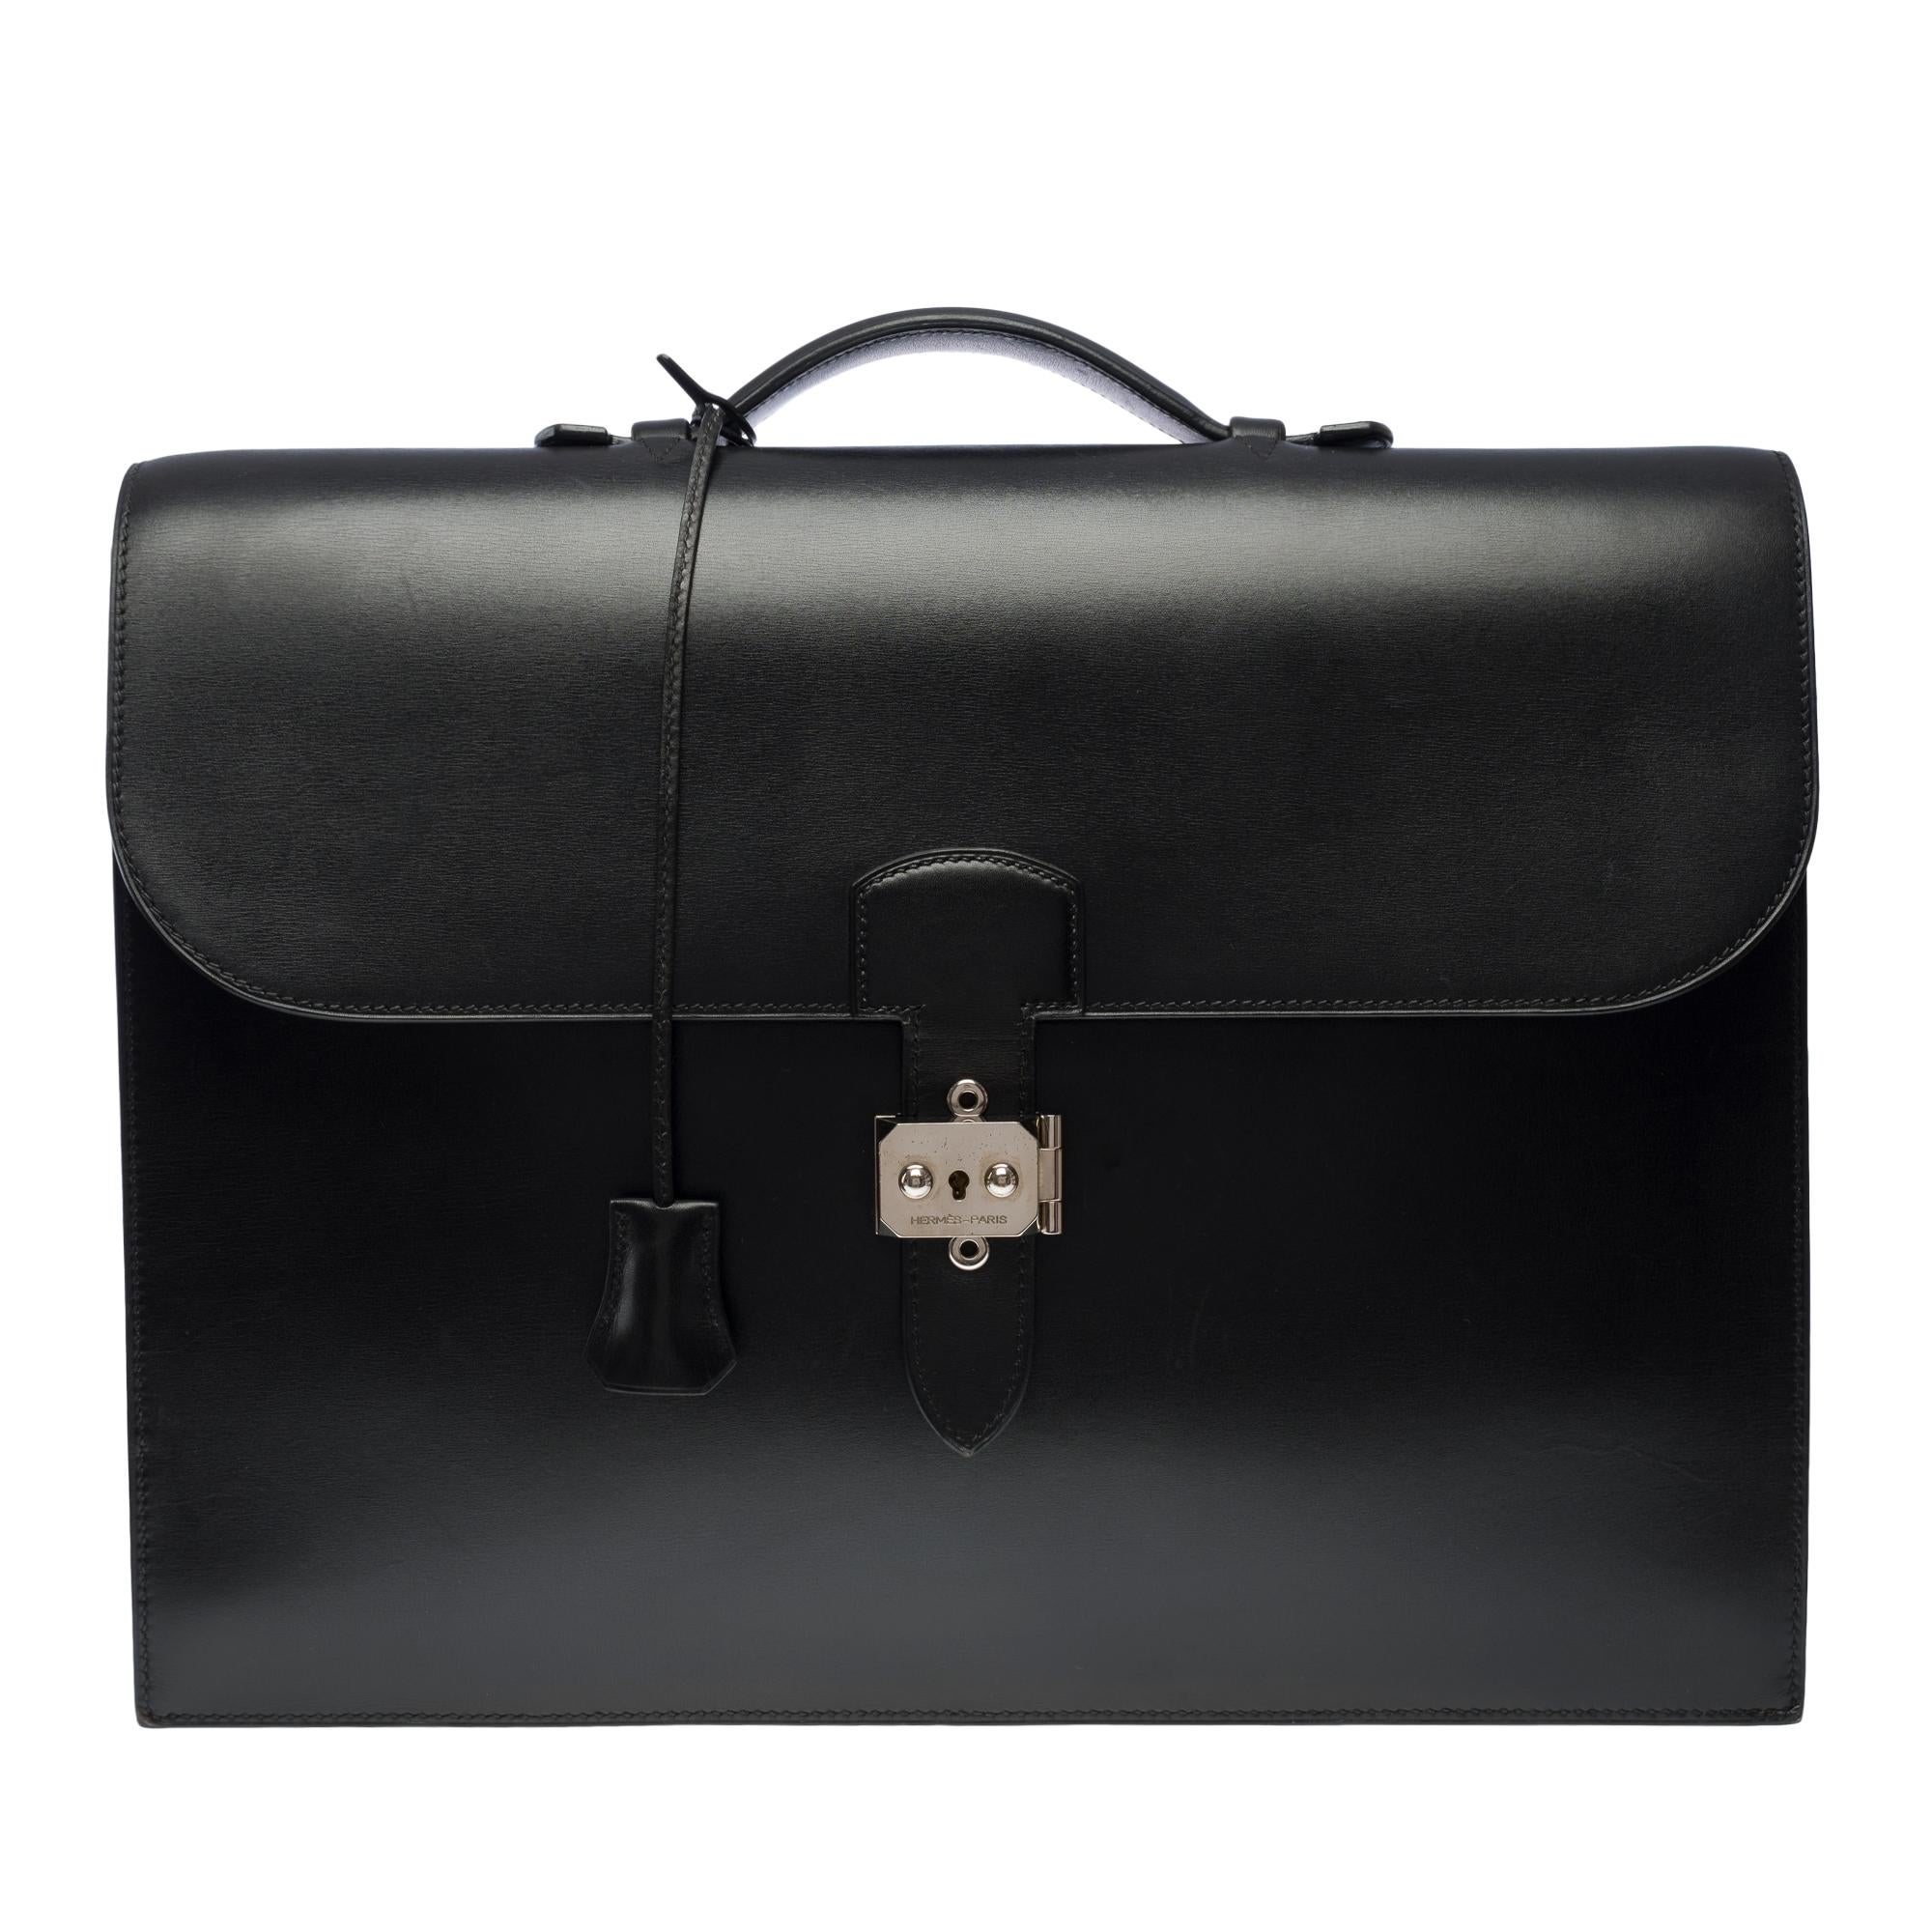 Exceptional​ ​&​ ​Classy​ ​Hermès​ ​Sac​ ​à​ ​Dépêches​ ​Briefcase​ ​in​ ​black​ ​leather​ ​box,​ ​palladium​ ​silver​ ​metal​ ​trim,​ ​simple​ ​handle​ ​in​ ​black​ ​leather​ ​allowing​ ​a​ ​hand​ ​carry

Closure​ ​with​ ​flap​ ​by​ ​lock​